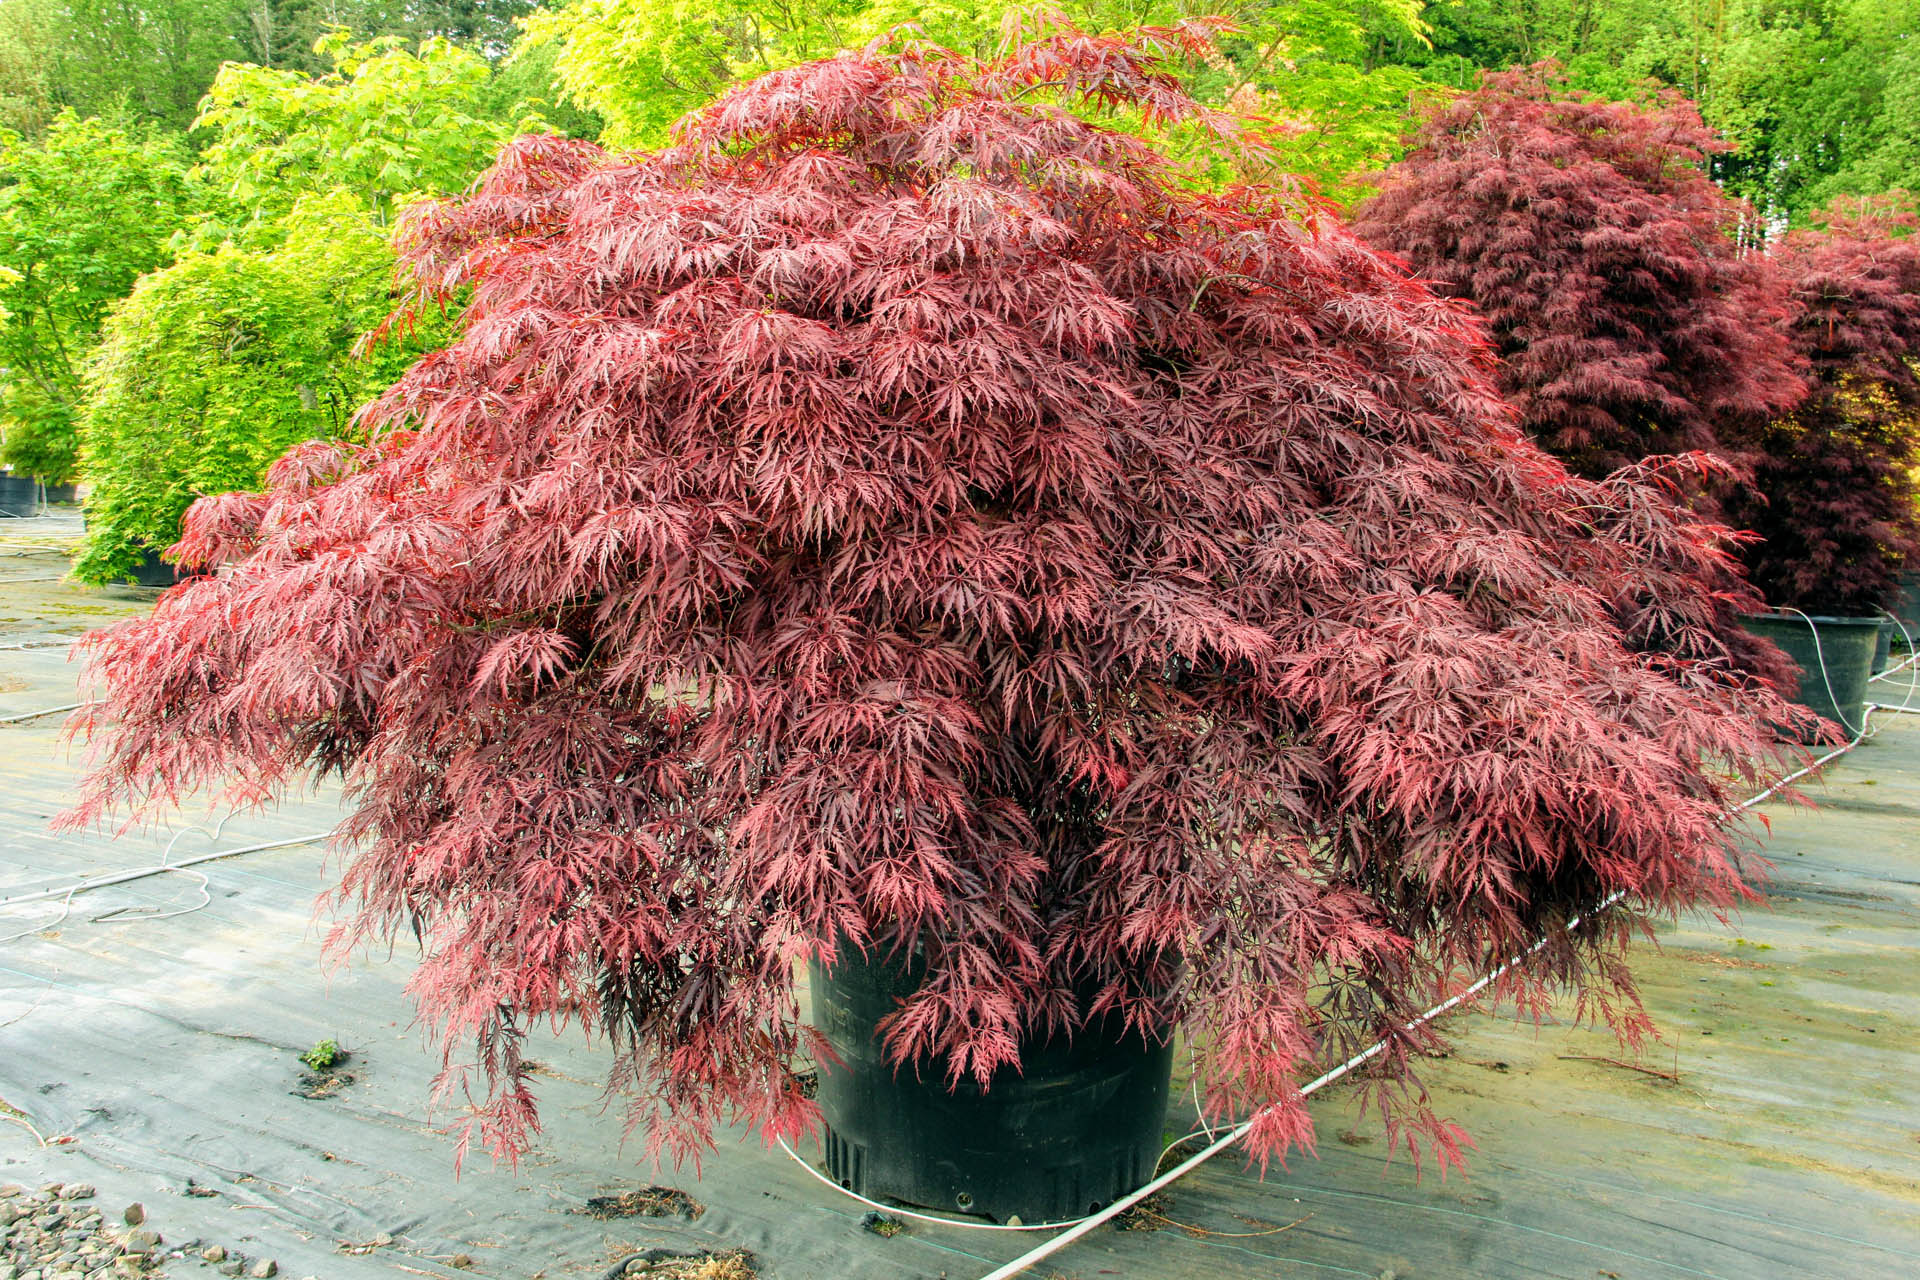 Acer palmatum 'Red Dragon' (Laceleaf Japanese Maple) - 80cm - 5 Gallon Potted Tree